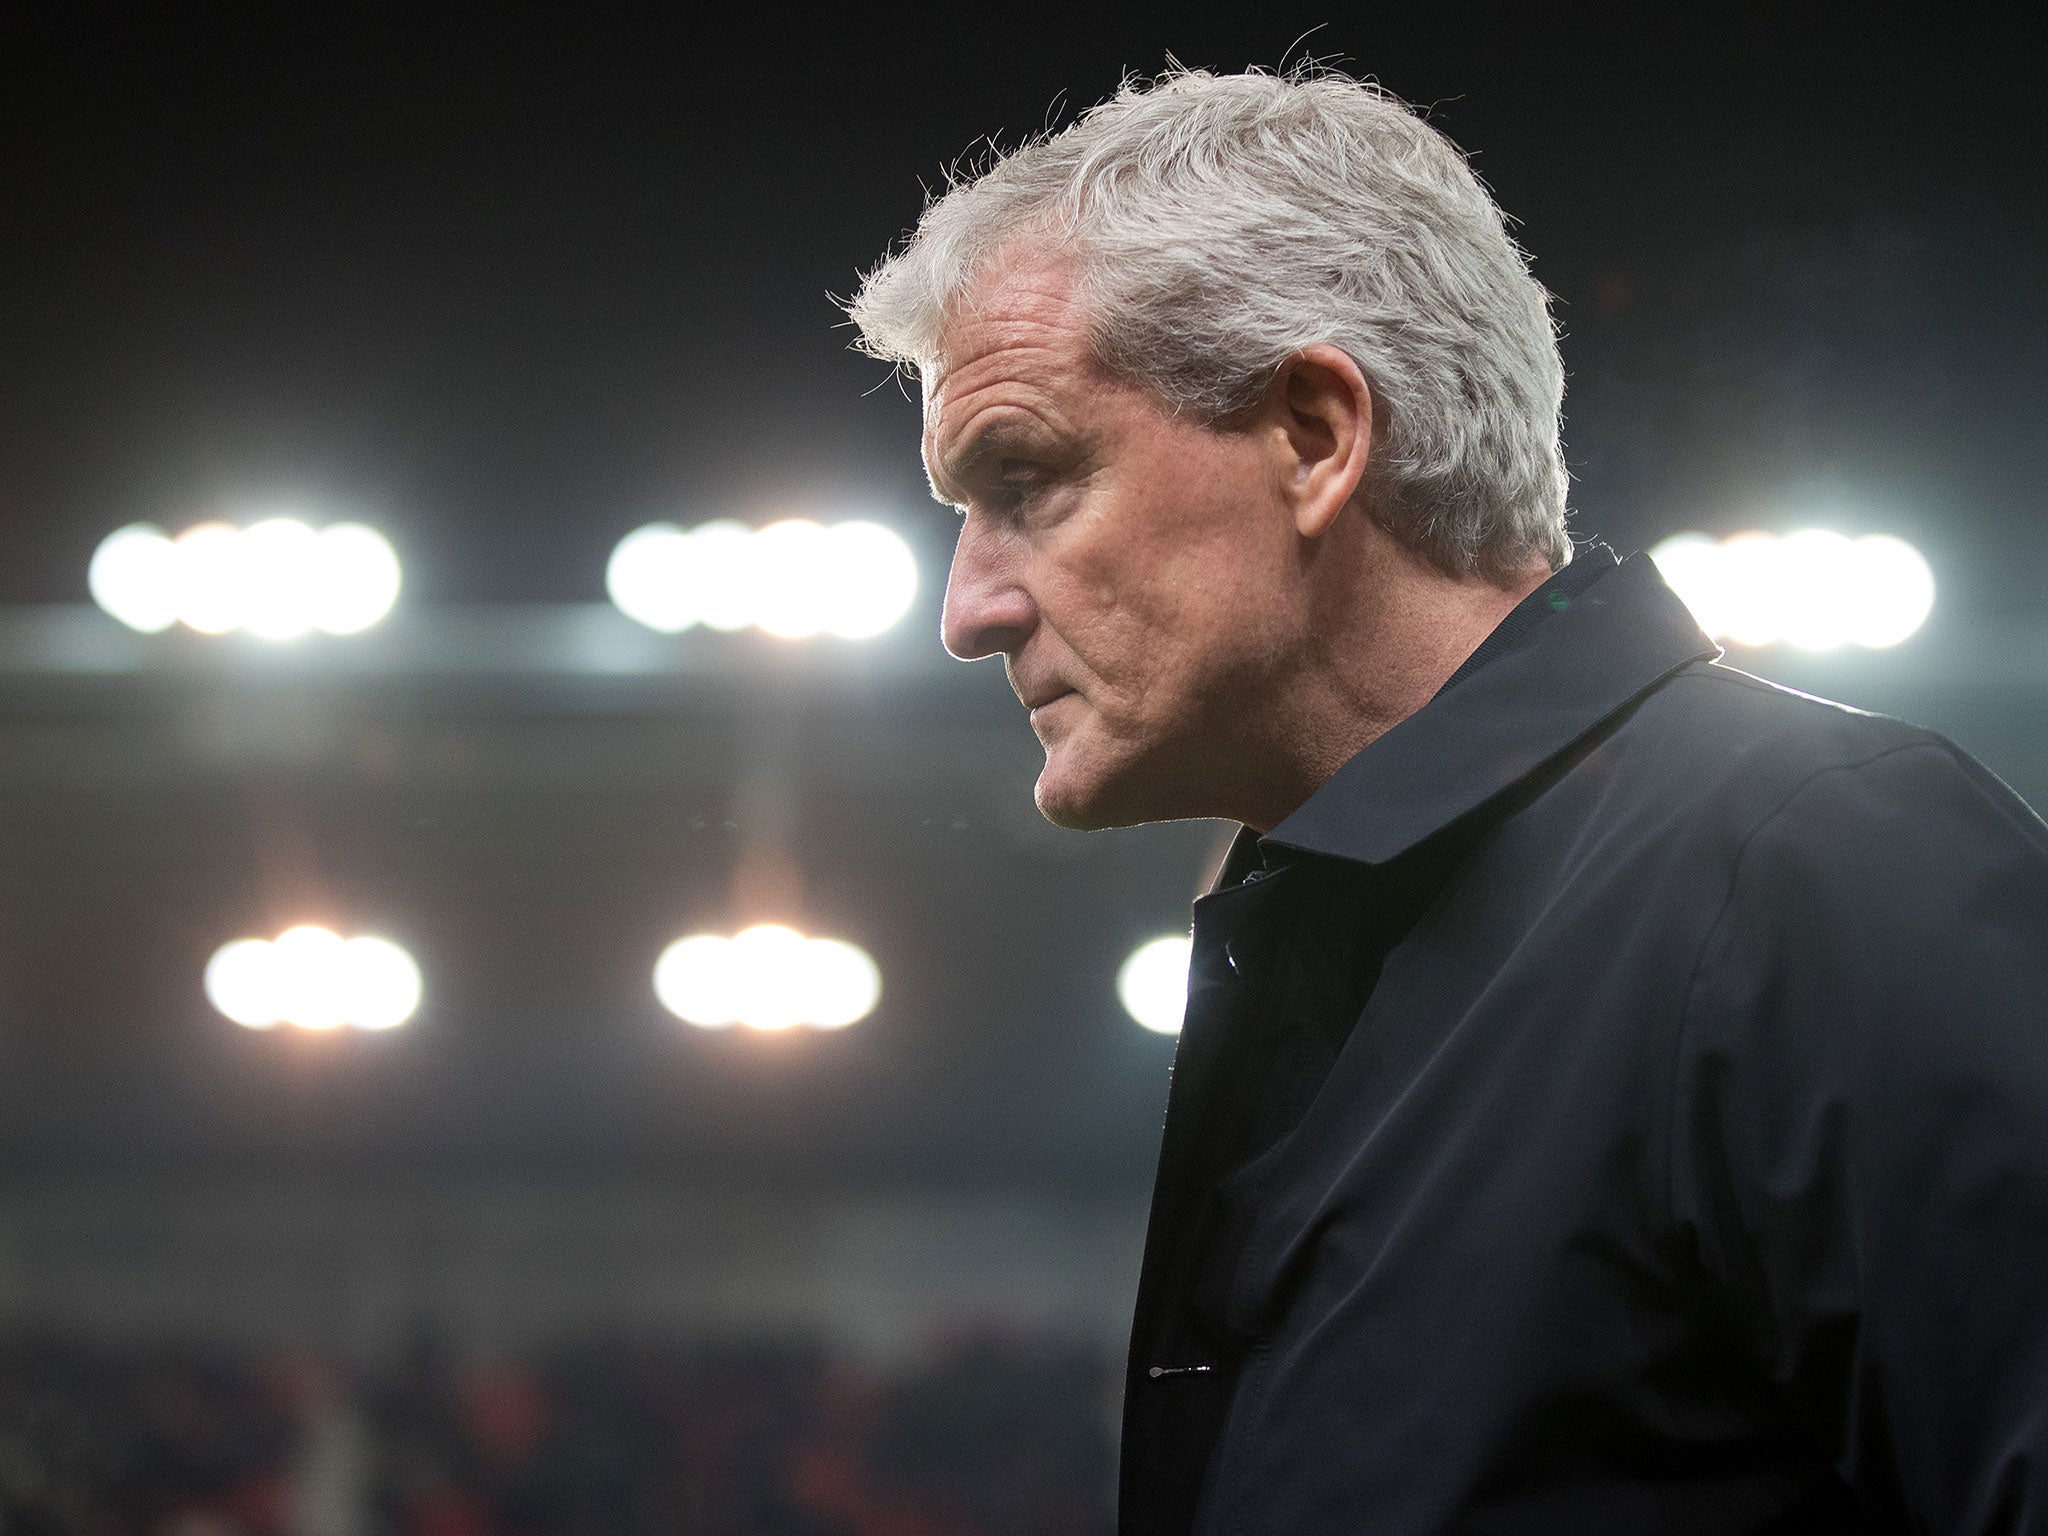 Mark Hughes’s four-and-a-half years at Stoke is over